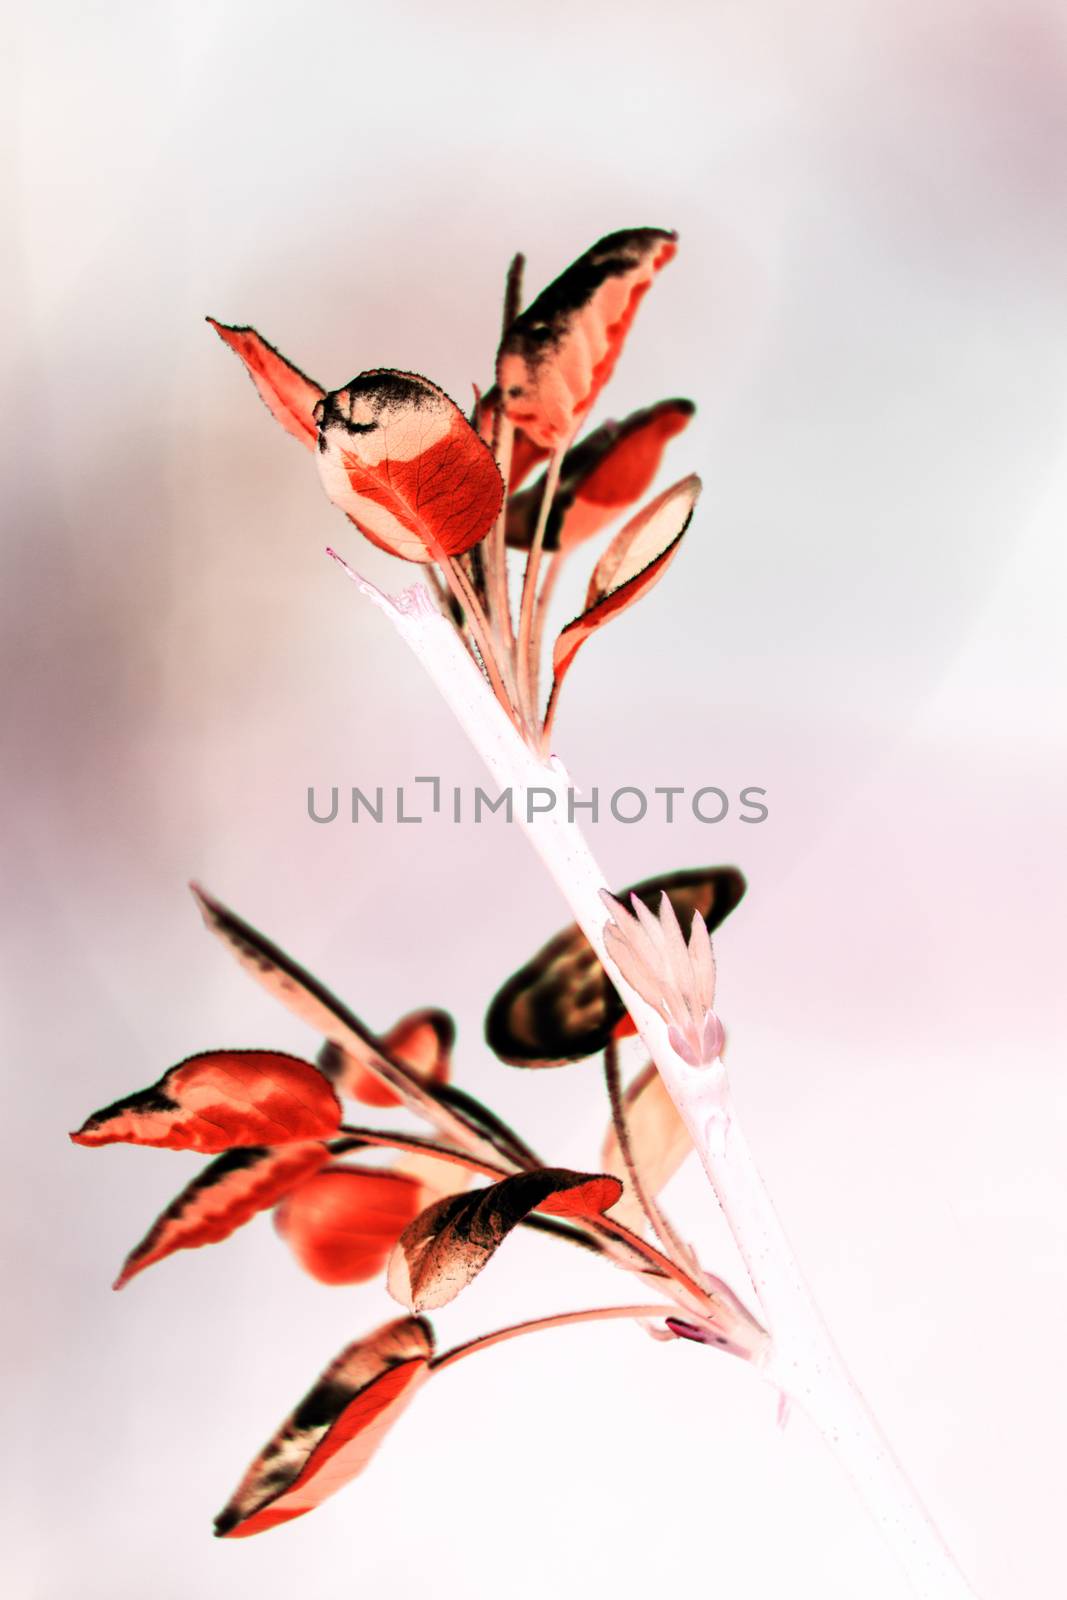 Artistic colored photo creation from photo shot of a branch with leaf sprouts in japan style